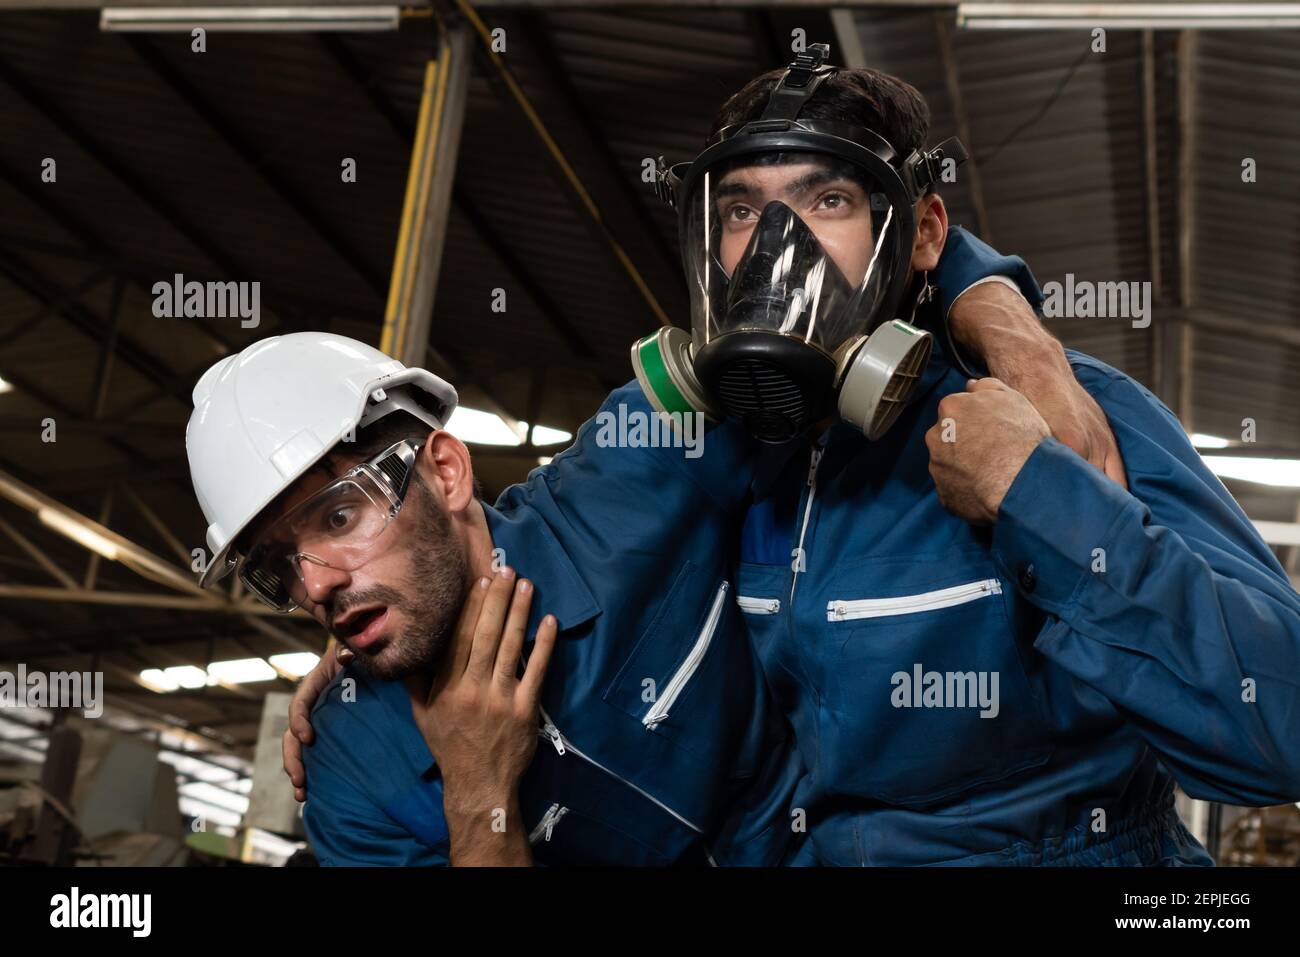 Skillful Factory Worker Rescue His Teammate Out Of Poisonous Gas